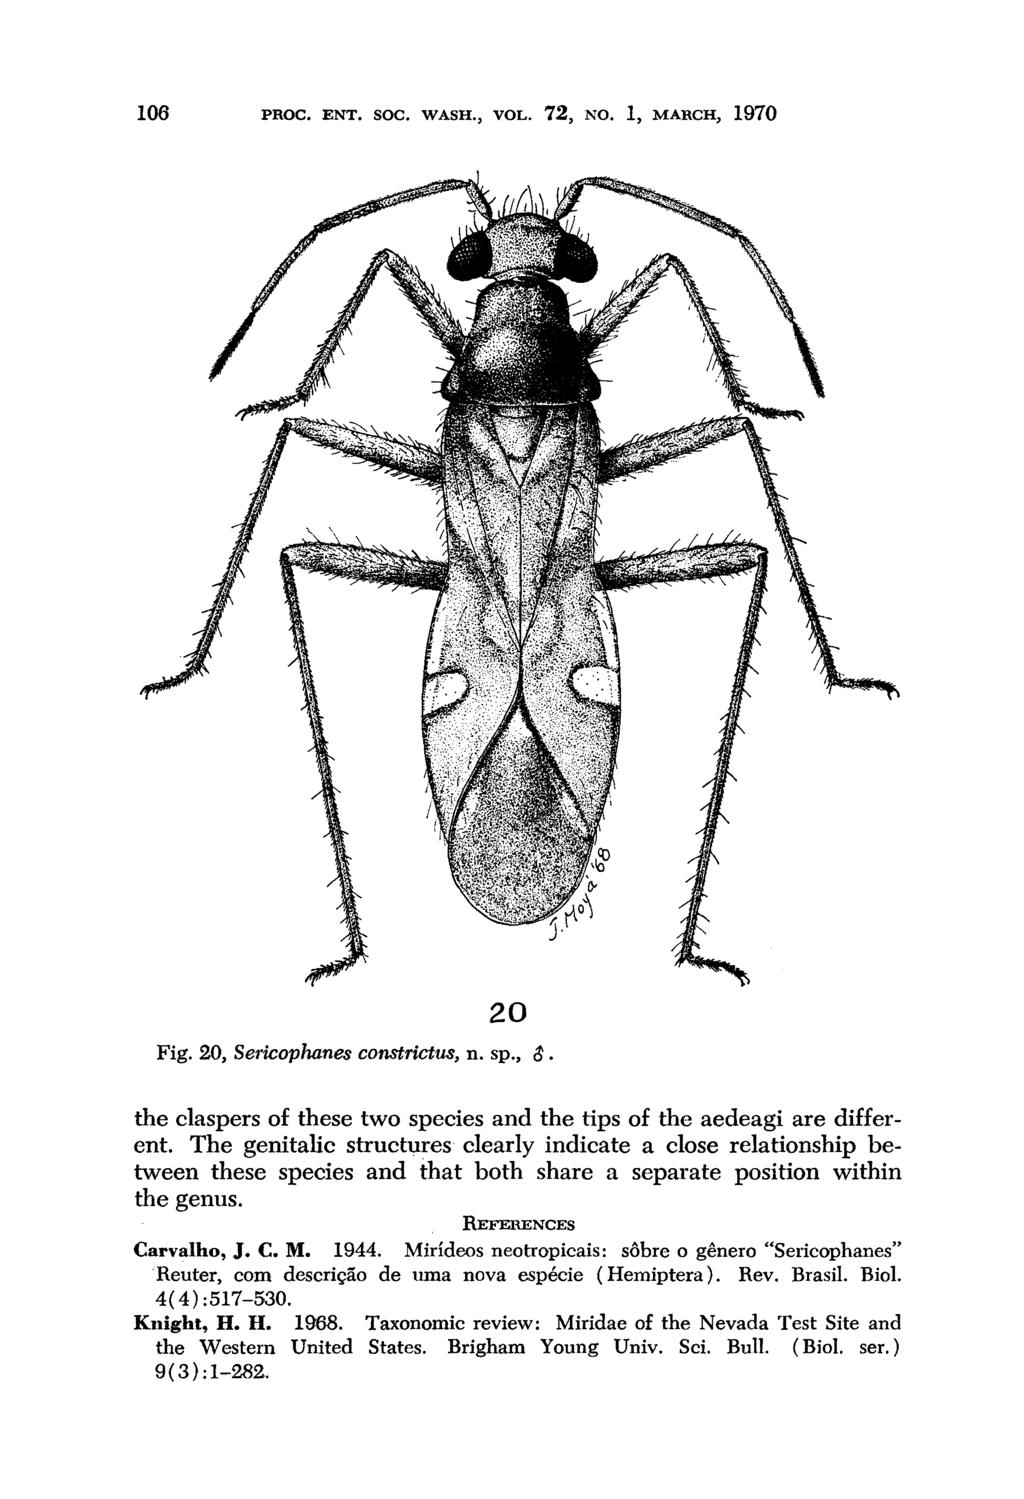 106 PROC. ENT. SOC. WASH., VOL. 72, NO. 1, MAIRCH, 1970 20 Fig. 20, Sericophanes constrictus, n. sp., S. the claspers of these two species and the tips of the aedeagi are different.